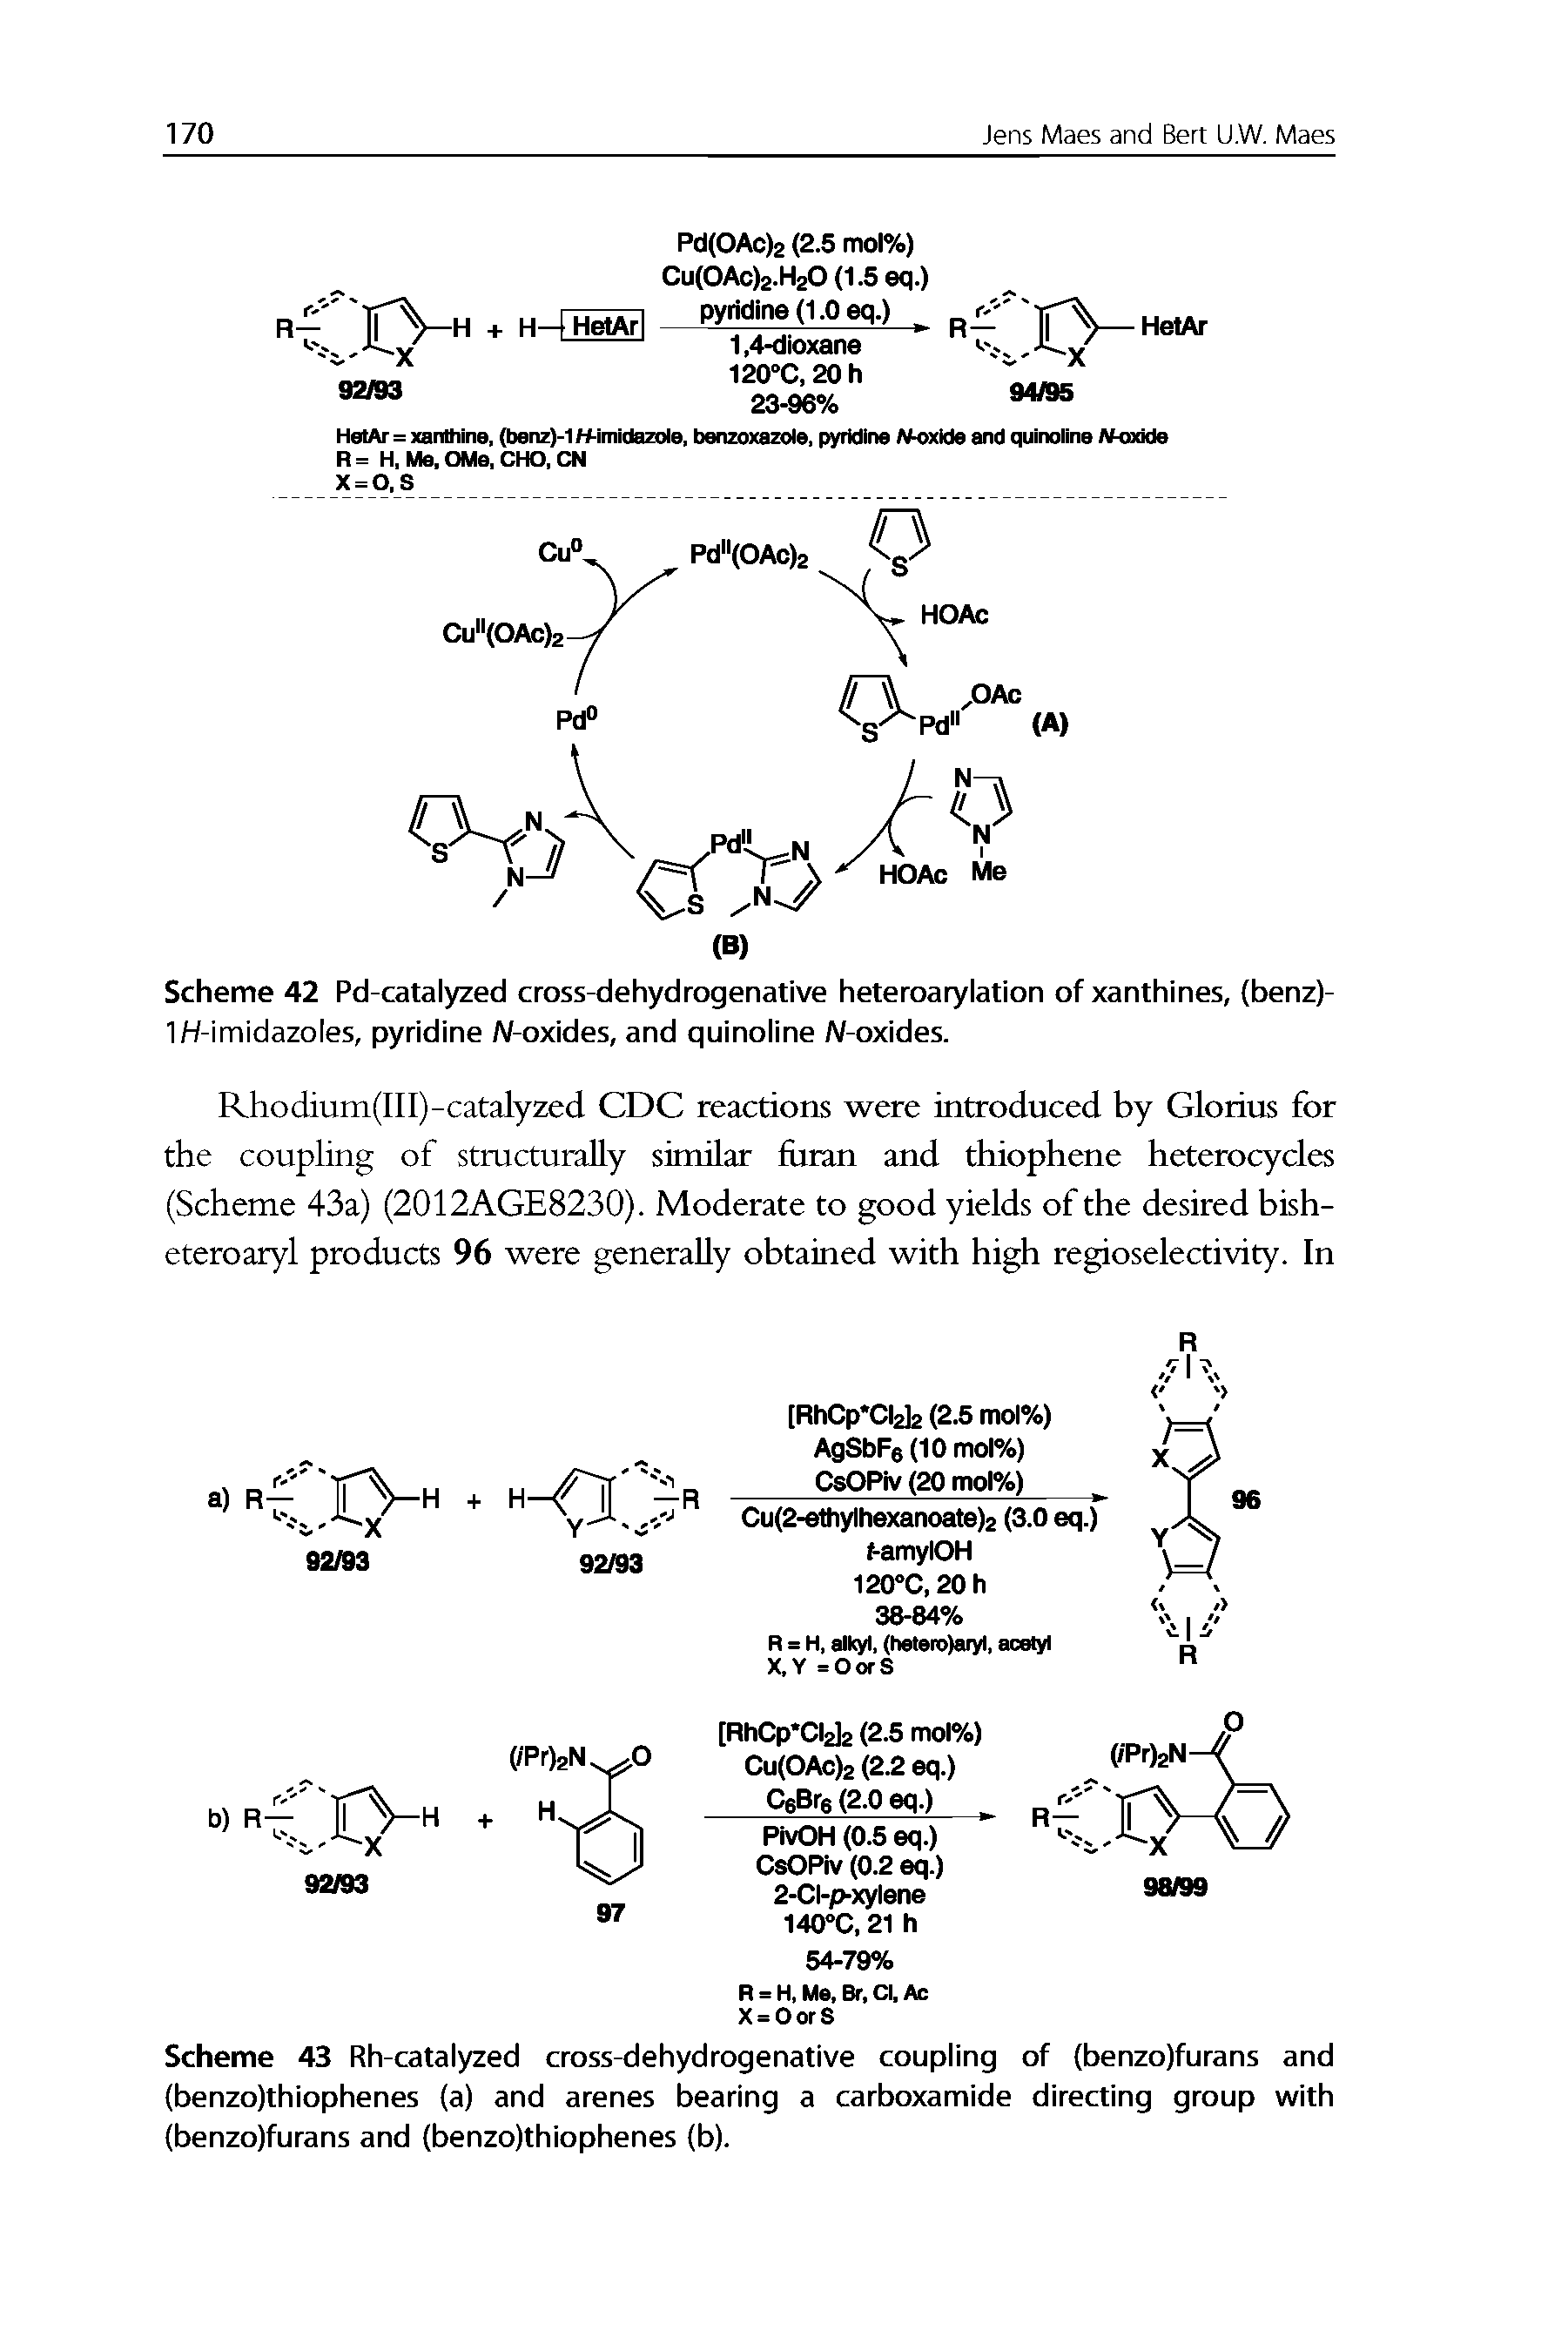 Scheme 43 Rh-catalyzed cross-dehydrogenative coupling of (benzo)furans and (benzo)thiophenes (a) and arenes bearing a carboxamide directing group with (benzo)furans and (benzo)thiophenes (b).